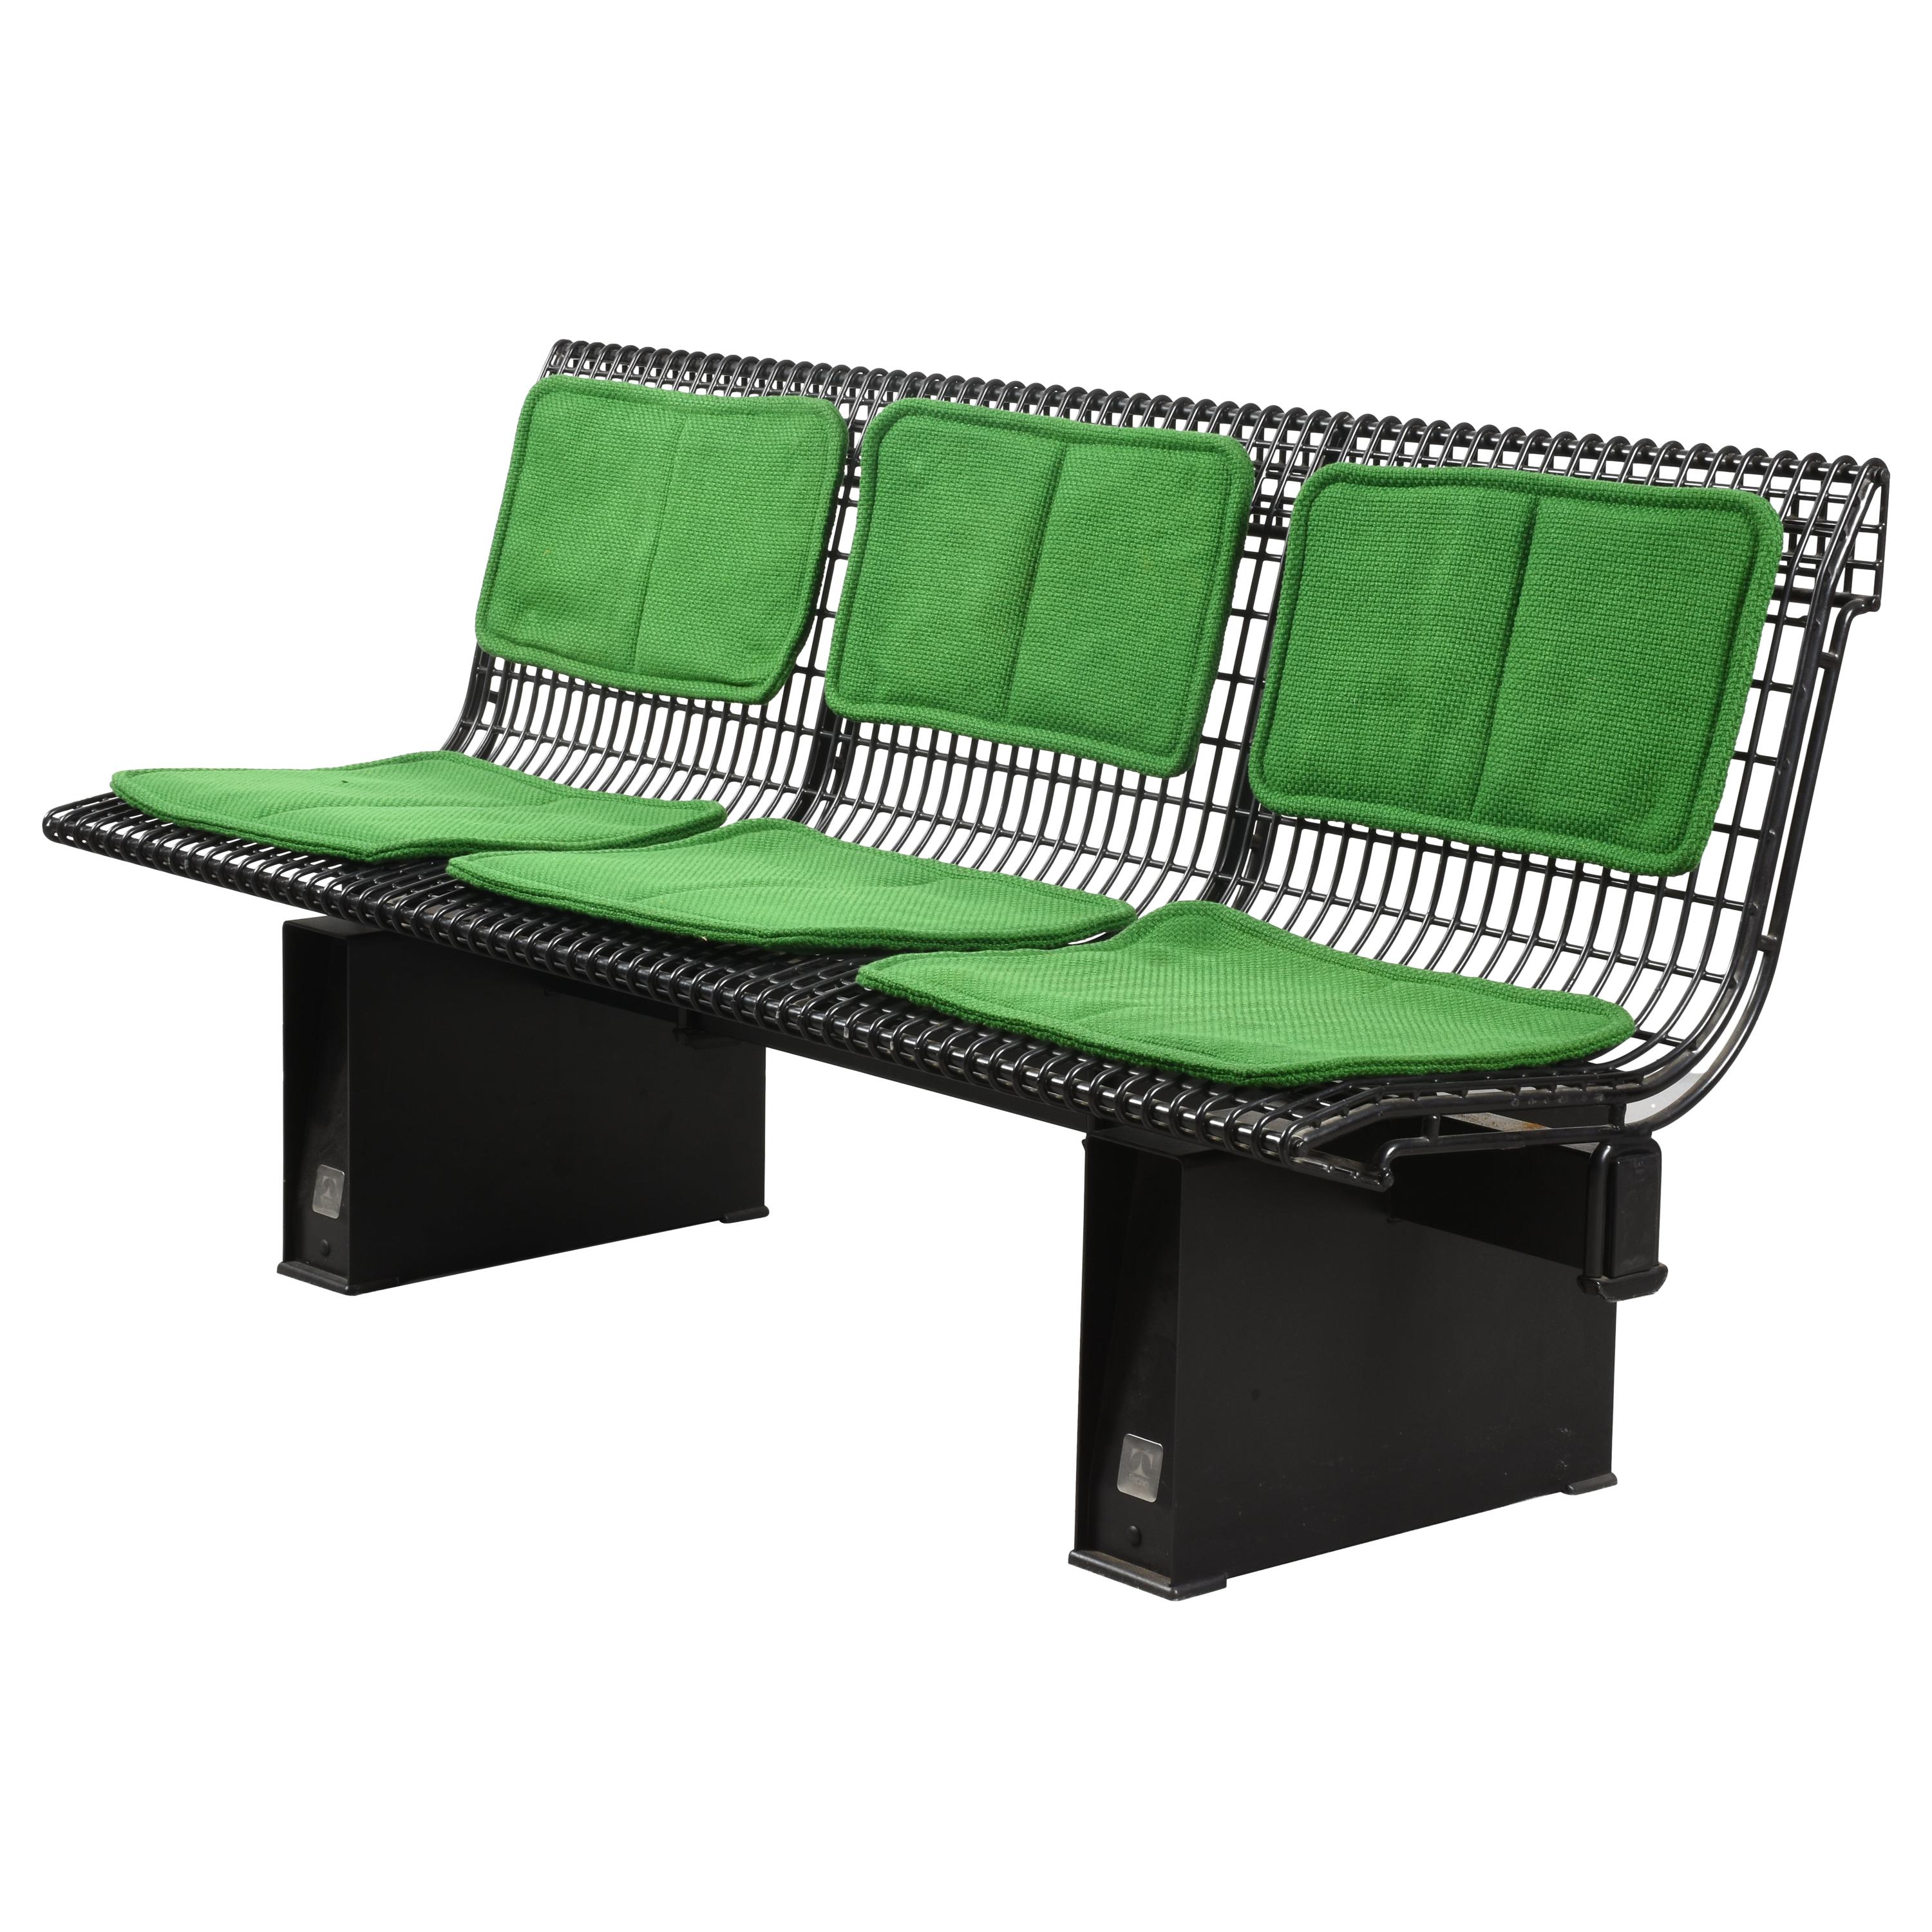 Amazing modern green fabric and enameled steel bench. This marvelous piece was produced by Tecno in Italy in 1982 and designed by Marco Fantoni.

This bench is unique as it is a one black enameled steel piece with green fabric flat cushions. Tecno